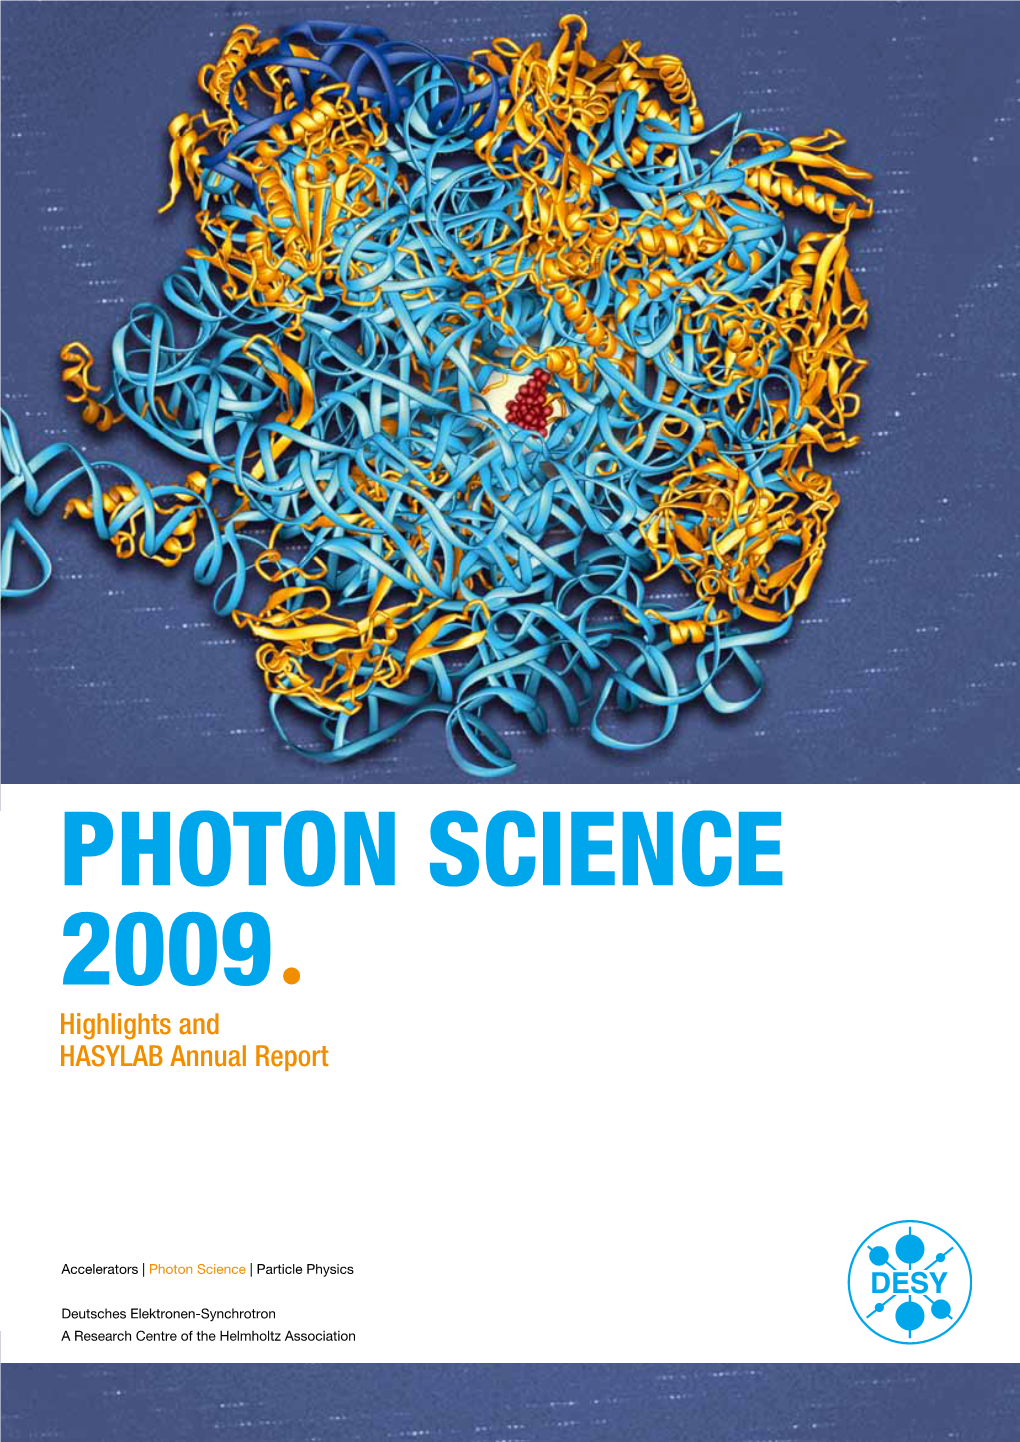 Photon Science 2009ª Highlights and HASYLAB Annual Report